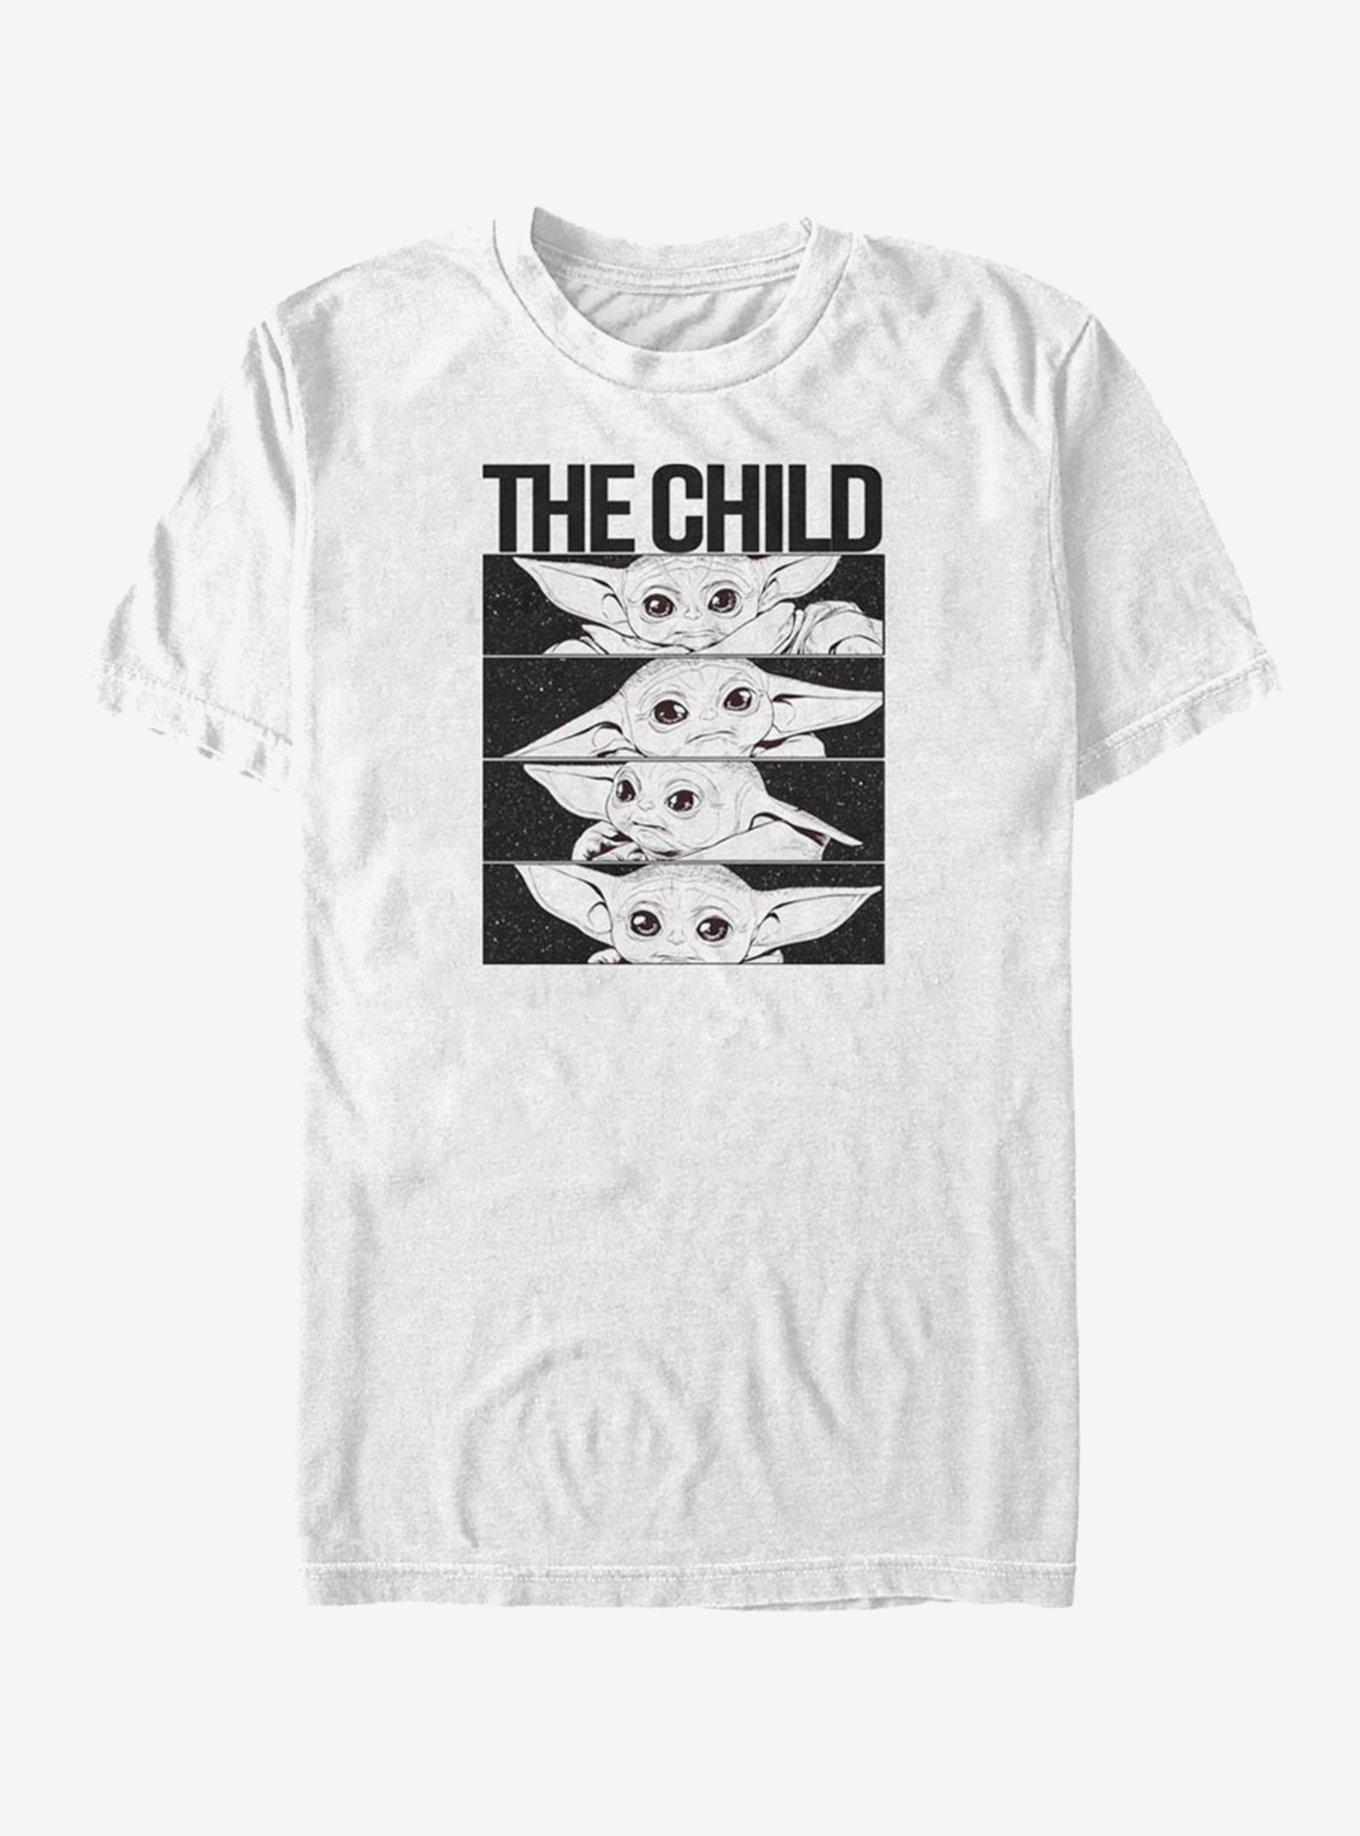 Star Wars The Mandalorian The Child Space T-Shirt, WHITE, hi-res